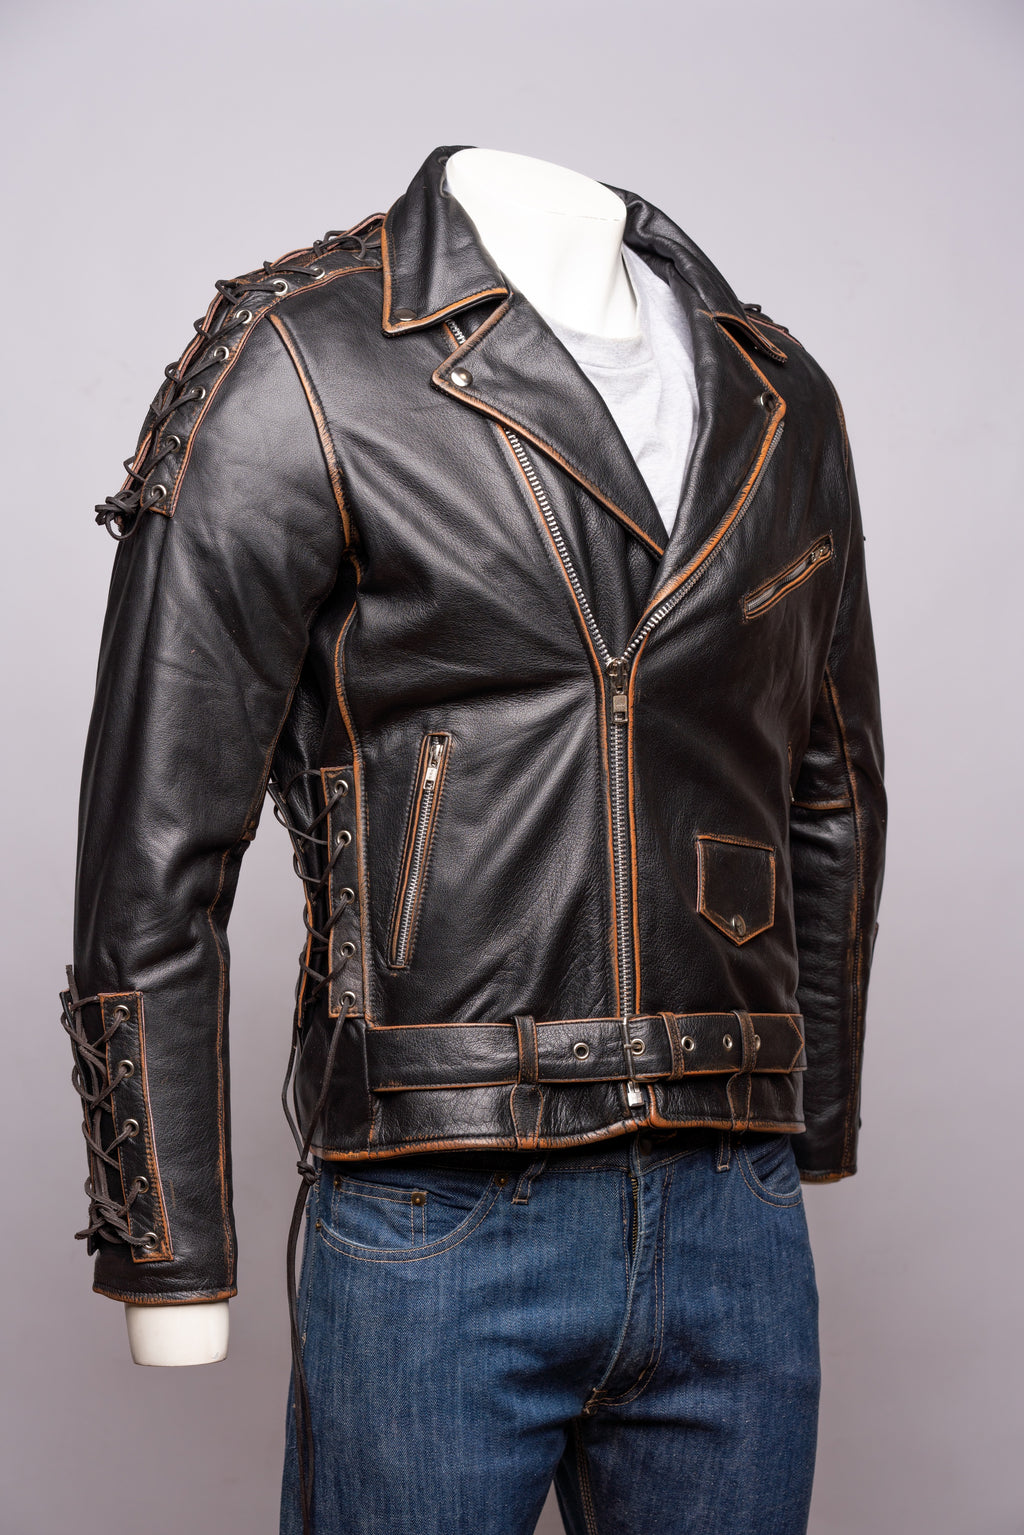 Men's Embossed Brando Style Cow Hide Biker Jacket with Laces - Abe